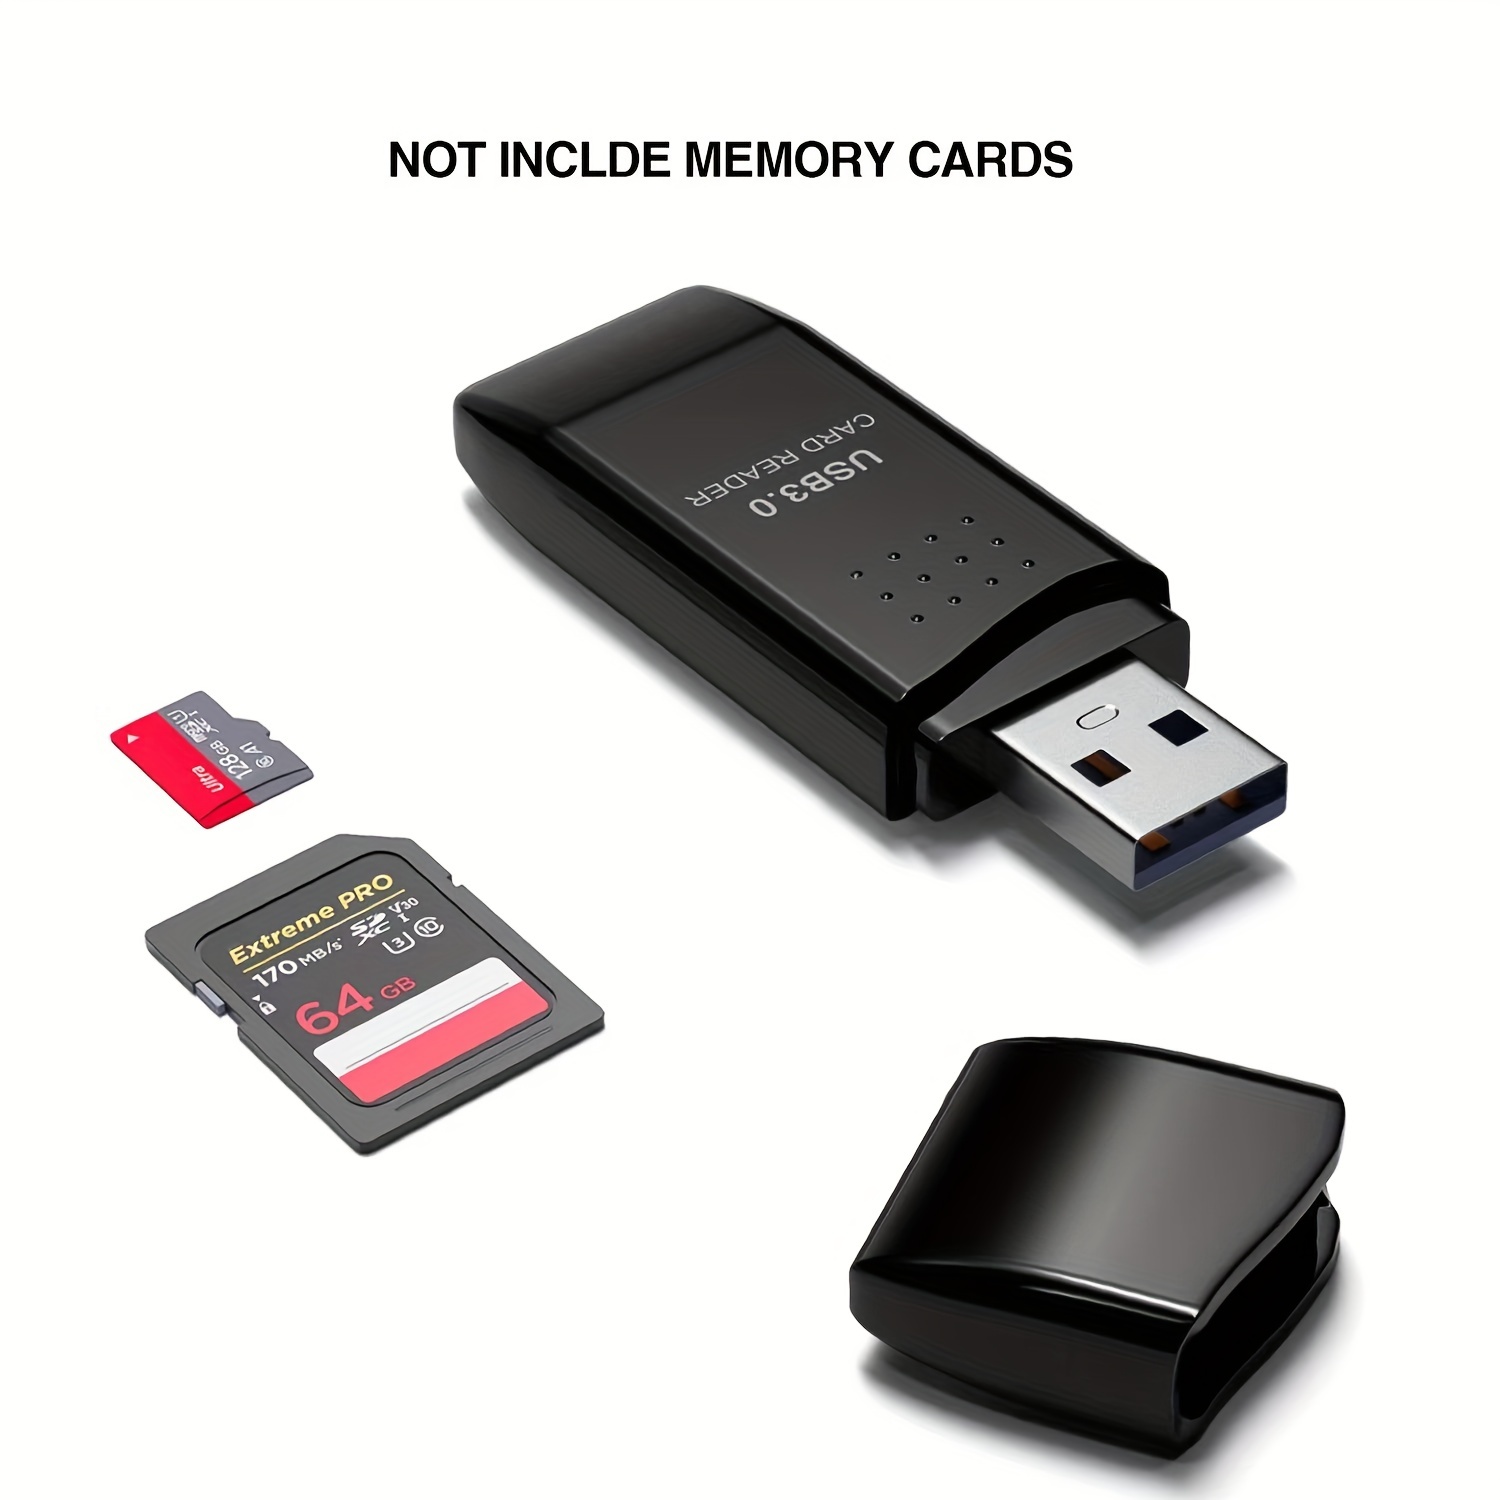 ORICO 4 In 1 USB 3.0 USB C Memory Card Reader SD TF CF MS Compact